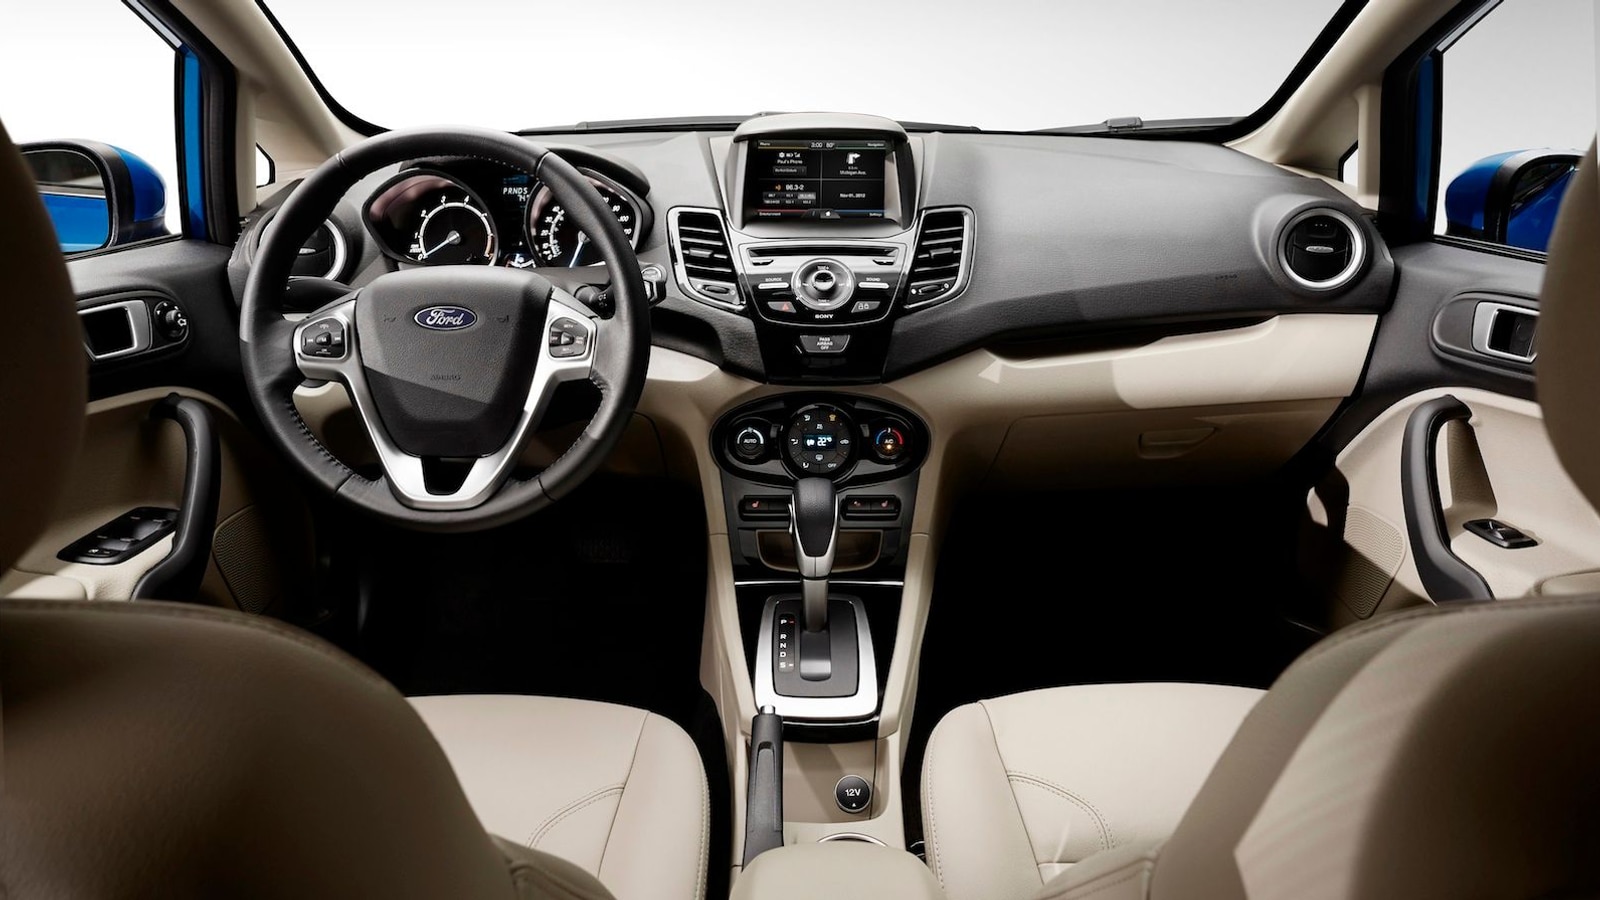 2014 Ford Fiesta Updates Styling Interior Myfordtouch And Ecoboost